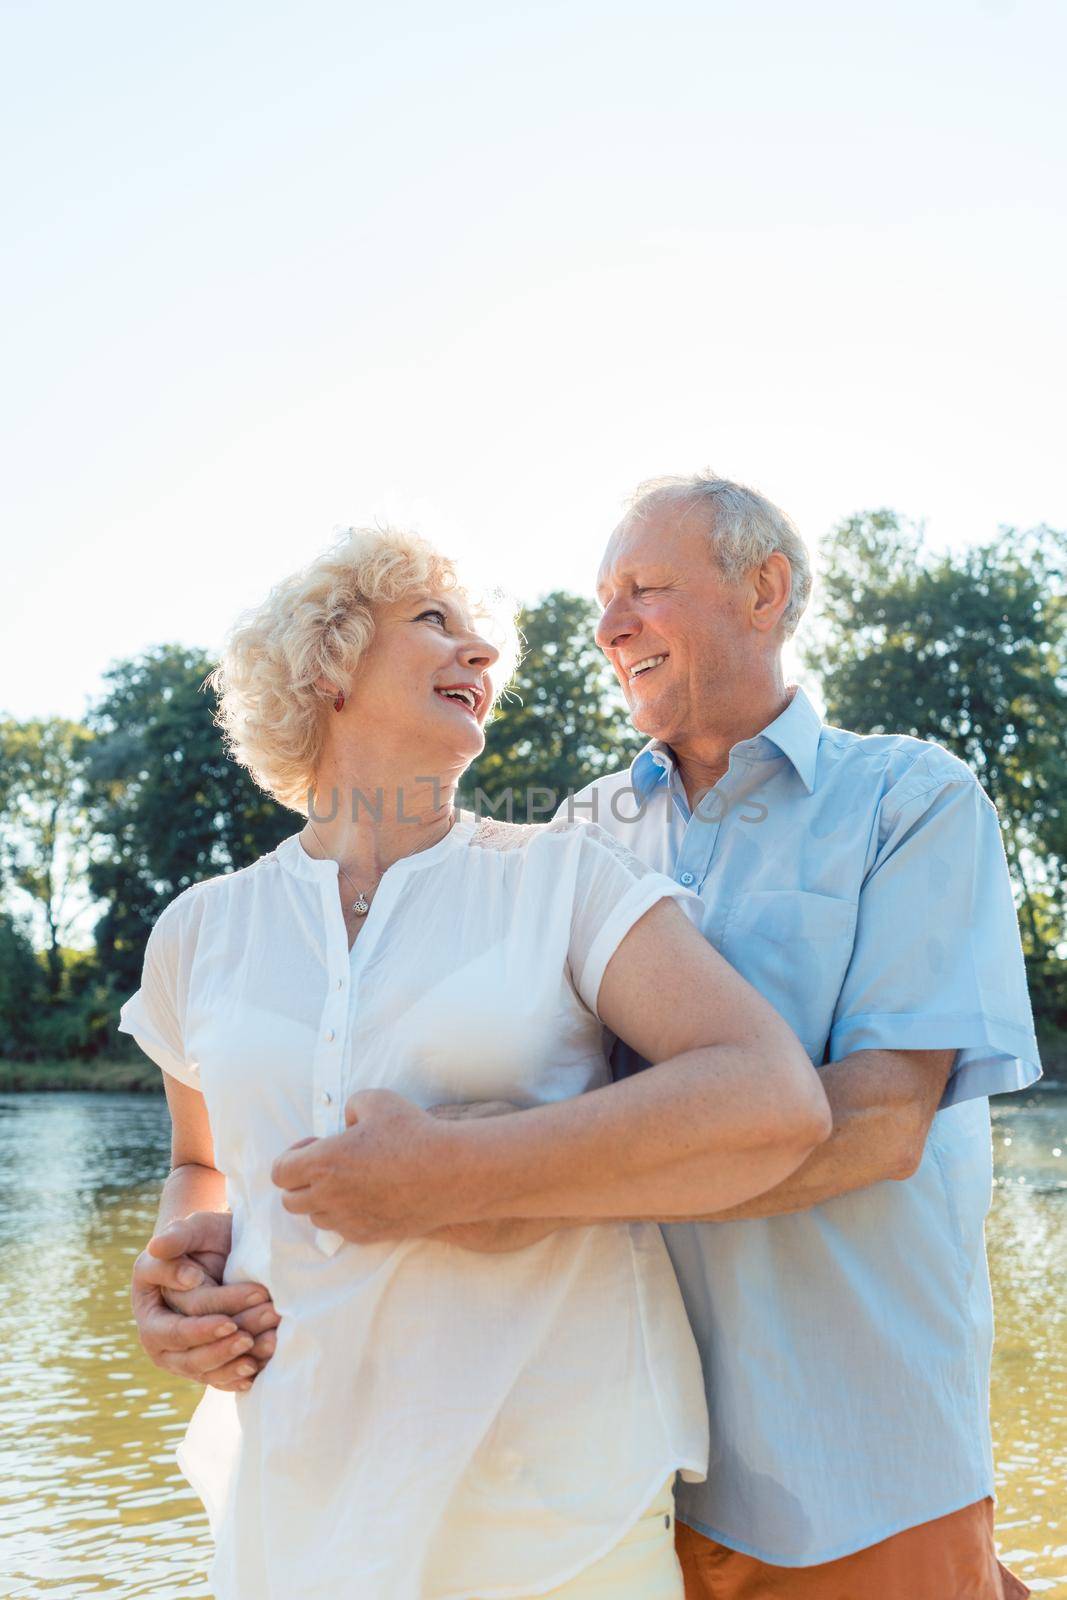 Low-angle side view portrait of a romantic senior couple in love enjoying a healthy and active lifestyle outdoors in summer